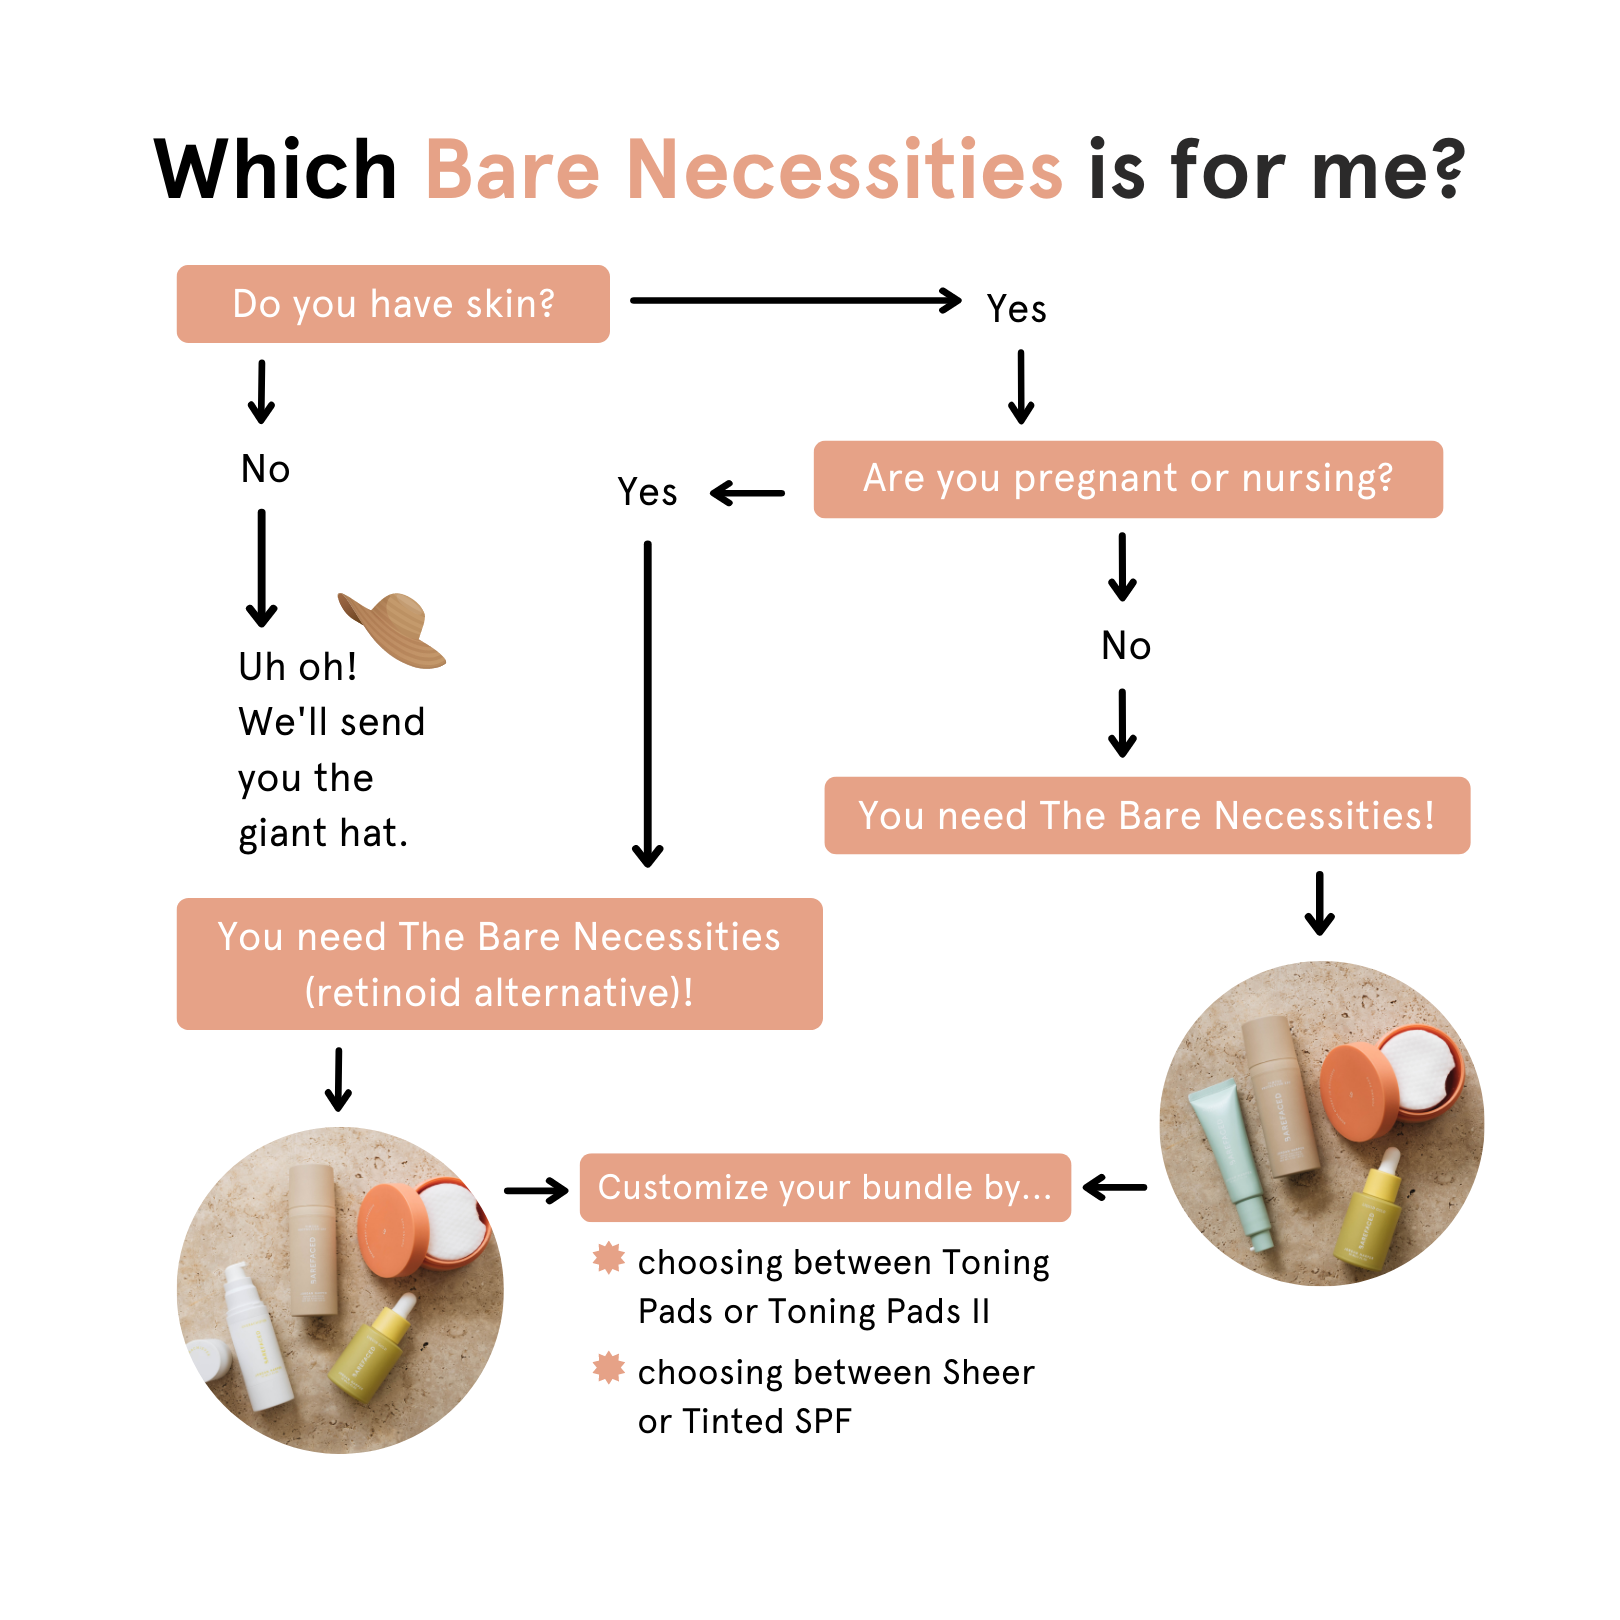 Infographic on which Bare Necessities is right for you